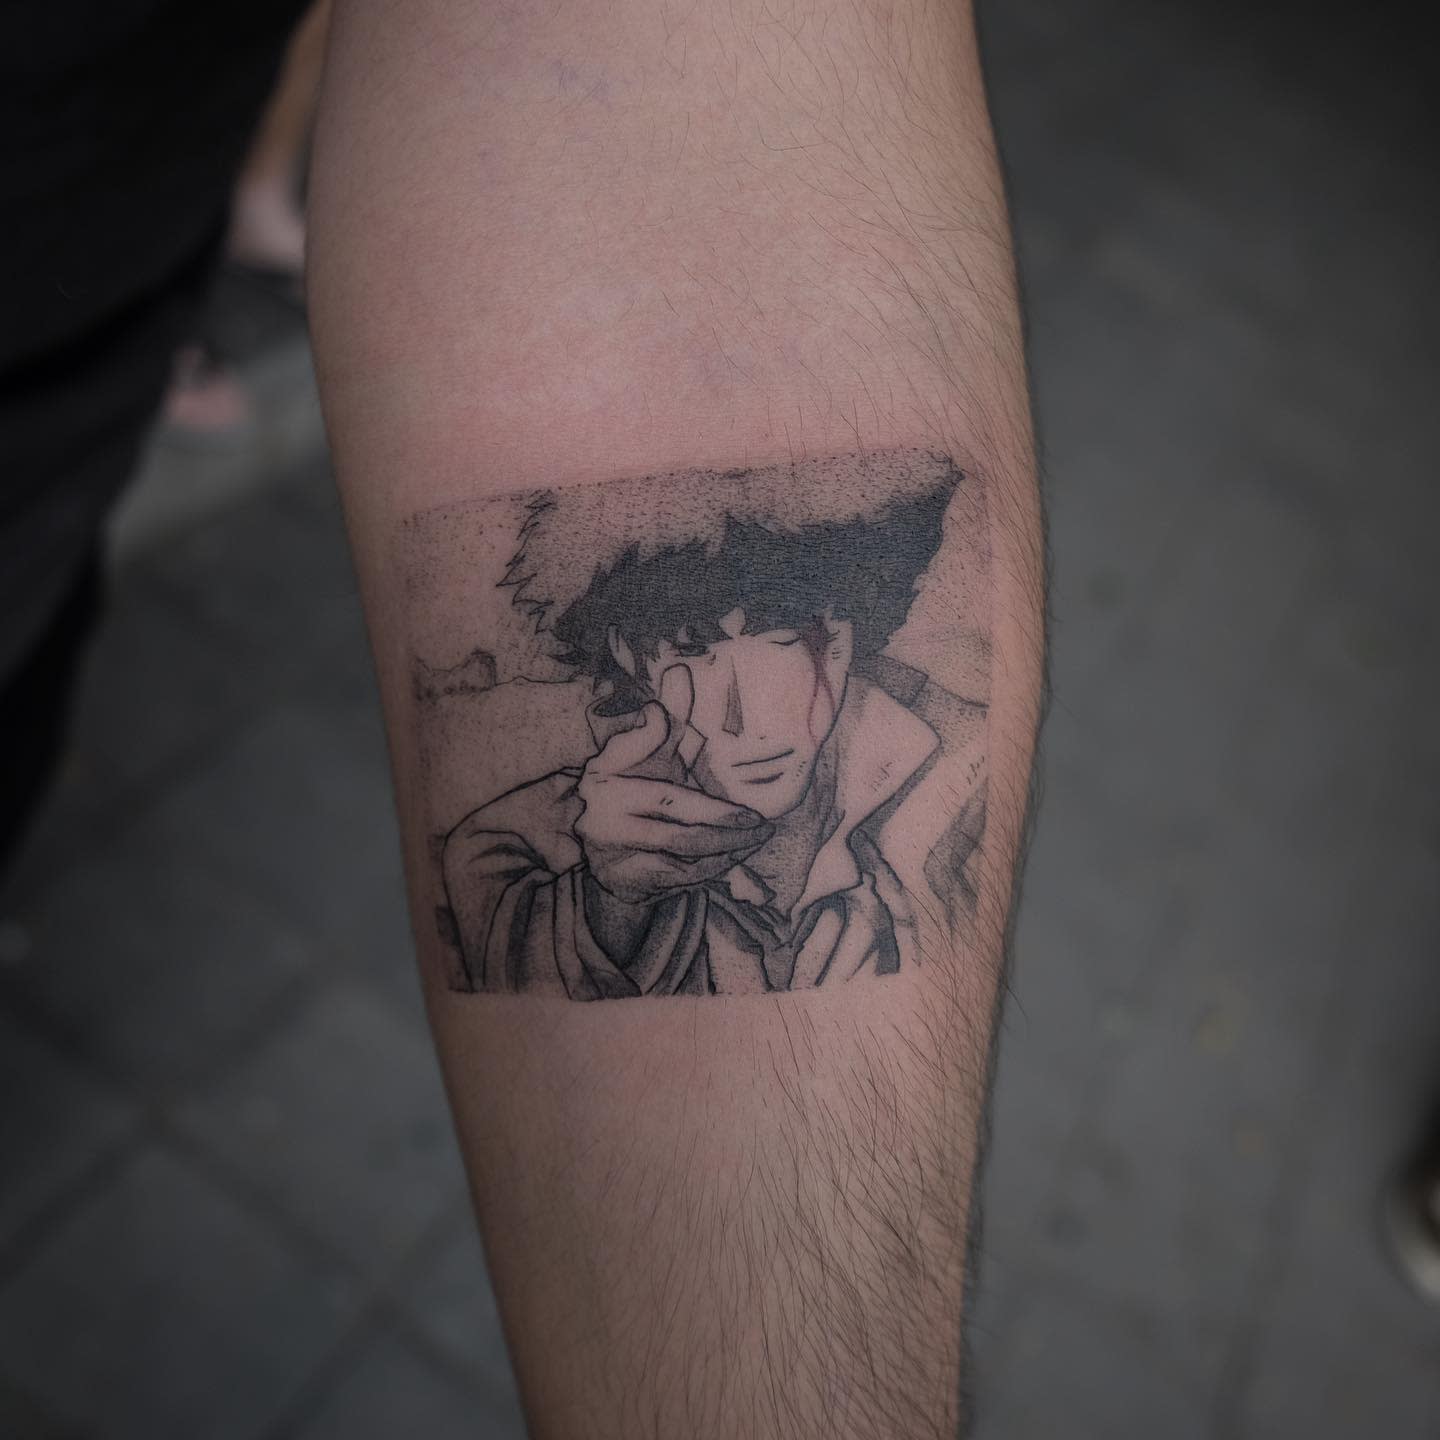 Radical Edward Cowboy Bebop tattoo done today Thanks to Alex for coming in  for this piece Message me bofthedead for any anime  Brian Easlon  bofthedead on Instagram